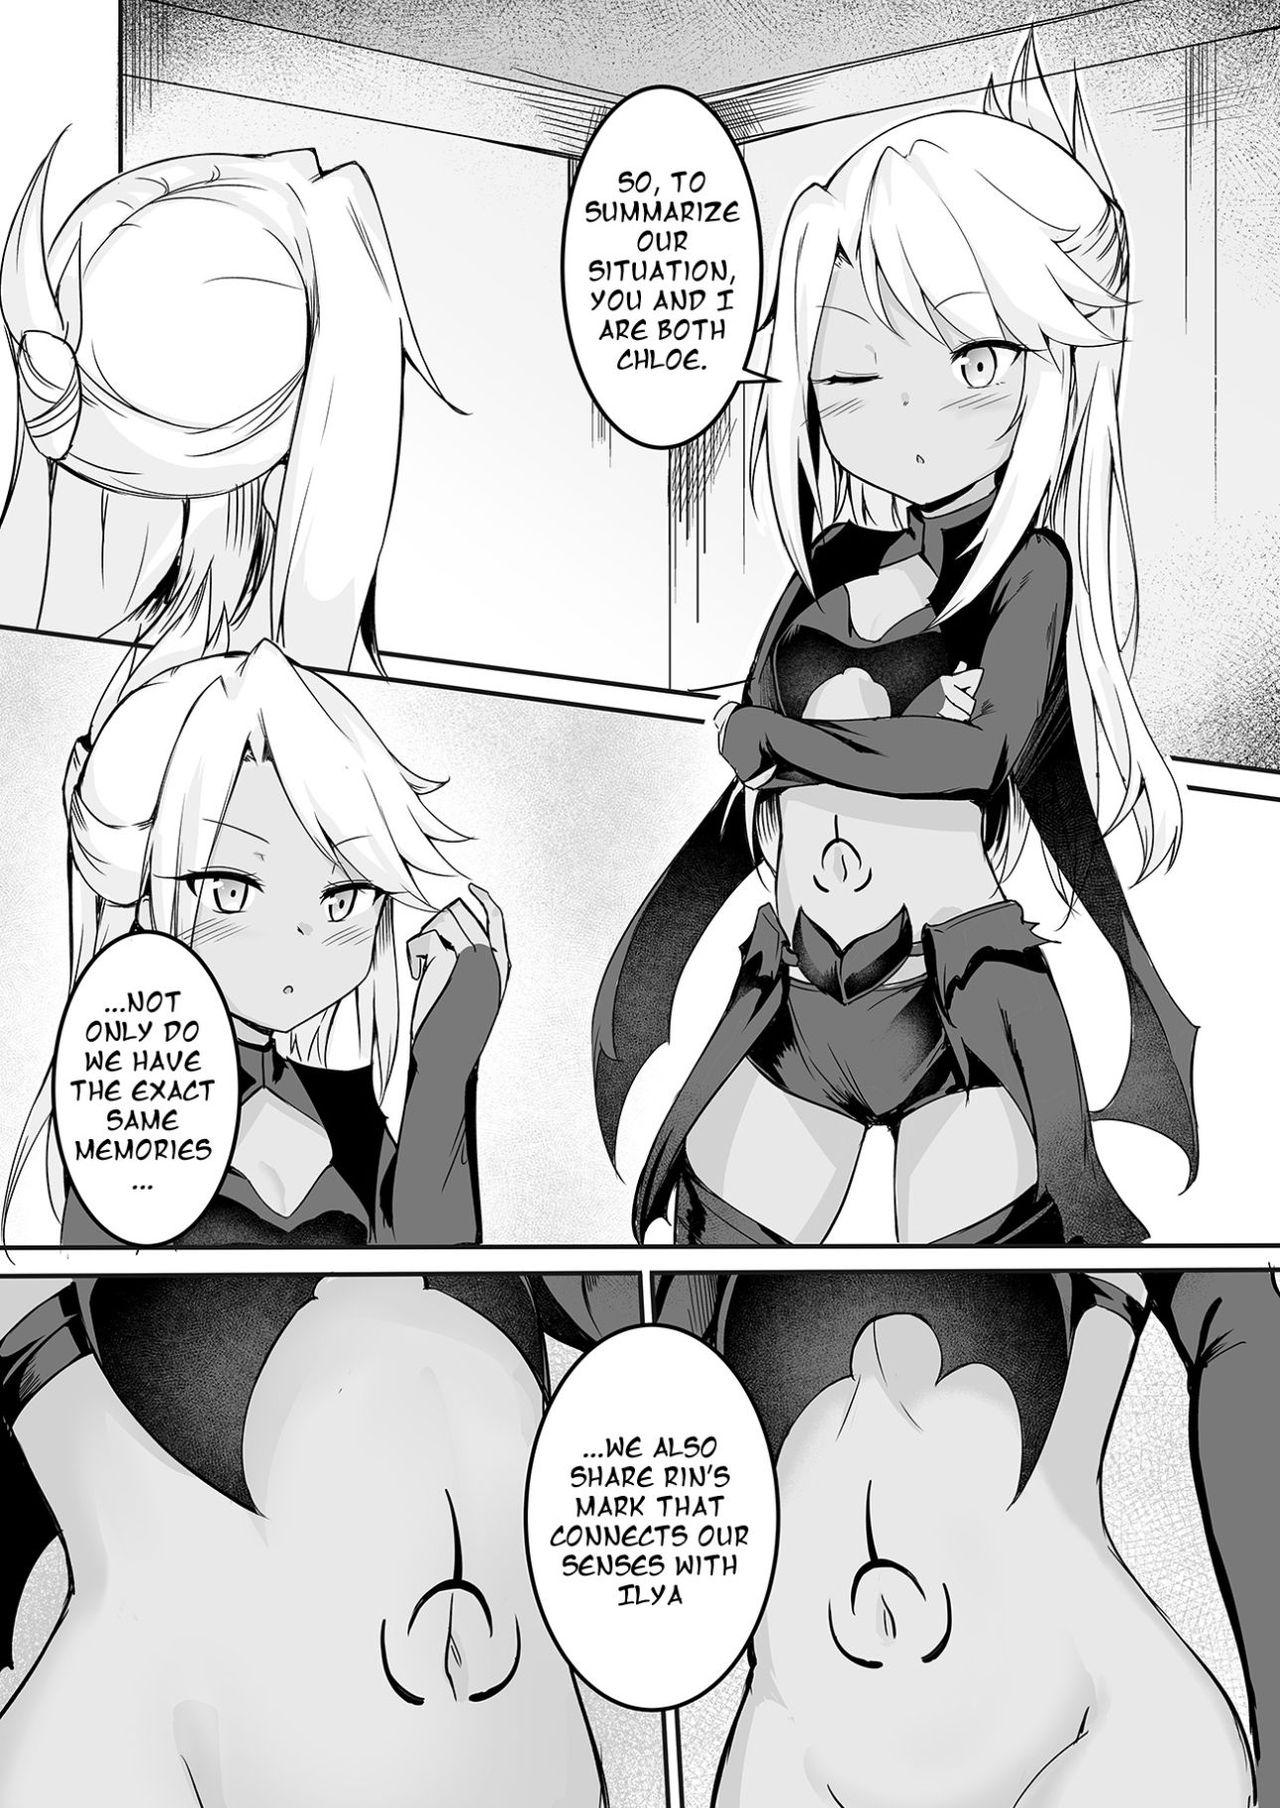 Culito CHLOE x CHLOE - Fate kaleid liner prisma illya Party - Page 5